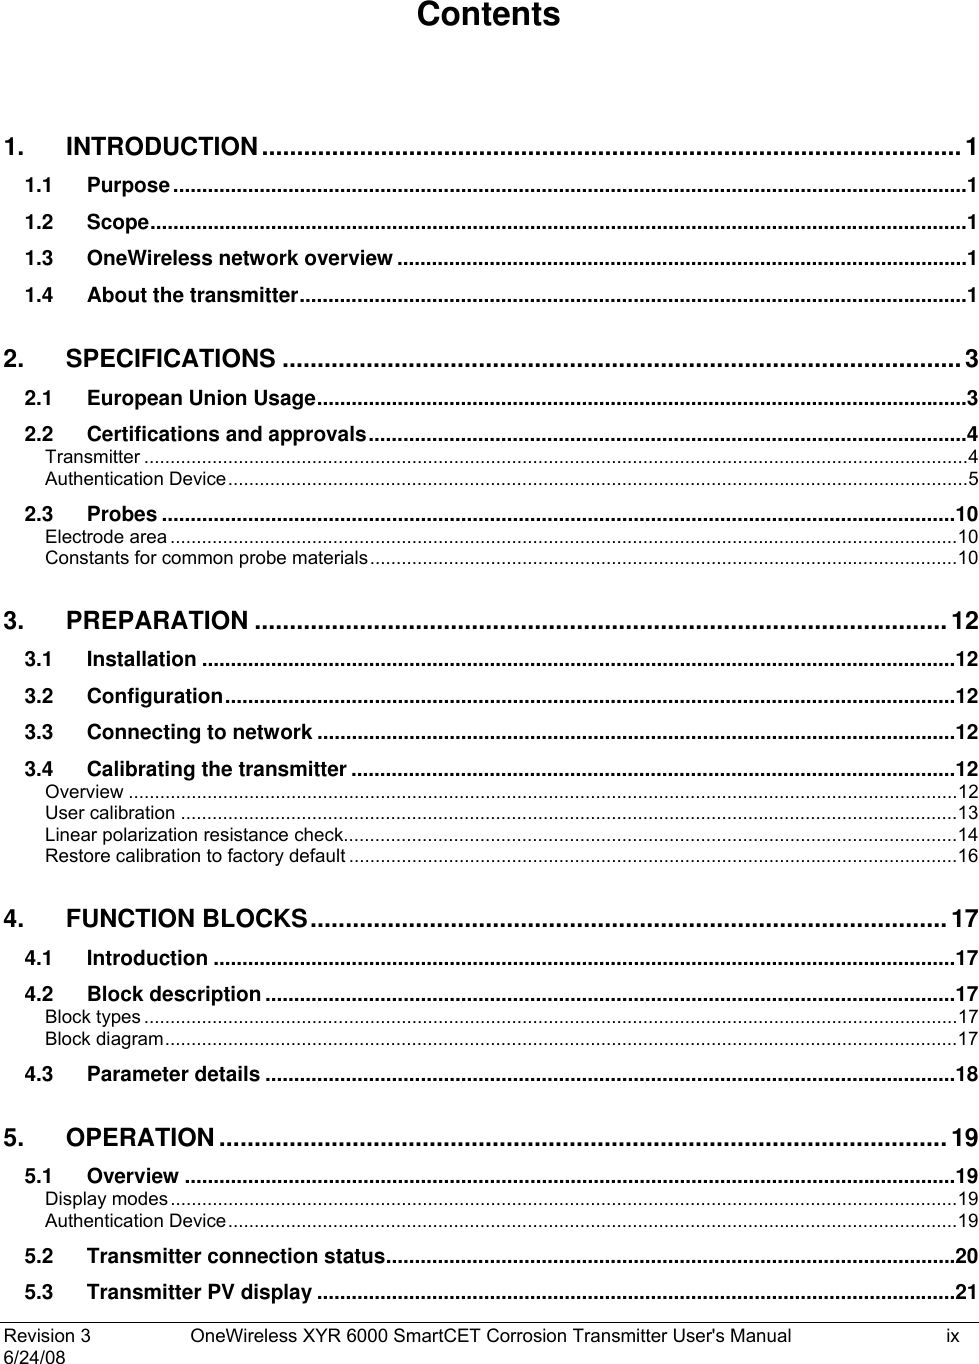  Revision 3  OneWireless XYR 6000 SmartCET Corrosion Transmitter User&apos;s Manual   ix 6/24/08 Contents  1. INTRODUCTION....................................................................................................1 1.1 Purpose..........................................................................................................................................1 1.2 Scope..............................................................................................................................................1 1.3 OneWireless network overview ...................................................................................................1 1.4 About the transmitter....................................................................................................................1 2. SPECIFICATIONS .................................................................................................3 2.1 European Union Usage.................................................................................................................3 2.2 Certifications and approvals........................................................................................................4 Transmitter .............................................................................................................................................................4 Authentication Device.............................................................................................................................................5 2.3 Probes ..........................................................................................................................................10 Electrode area ......................................................................................................................................................10 Constants for common probe materials................................................................................................................10 3. PREPARATION ...................................................................................................12 3.1 Installation ...................................................................................................................................12 3.2 Configuration...............................................................................................................................12 3.3 Connecting to network ...............................................................................................................12 3.4 Calibrating the transmitter .........................................................................................................12 Overview ..............................................................................................................................................................12 User calibration ....................................................................................................................................................13 Linear polarization resistance check.....................................................................................................................14 Restore calibration to factory default ....................................................................................................................16 4. FUNCTION BLOCKS........................................................................................... 17 4.1 Introduction .................................................................................................................................17 4.2 Block description ........................................................................................................................17 Block types ...........................................................................................................................................................17 Block diagram.......................................................................................................................................................17 4.3 Parameter details ........................................................................................................................18 5. OPERATION ........................................................................................................19 5.1 Overview ......................................................................................................................................19 Display modes......................................................................................................................................................19 Authentication Device...........................................................................................................................................19 5.2 Transmitter connection status...................................................................................................20 5.3 Transmitter PV display ...............................................................................................................21 